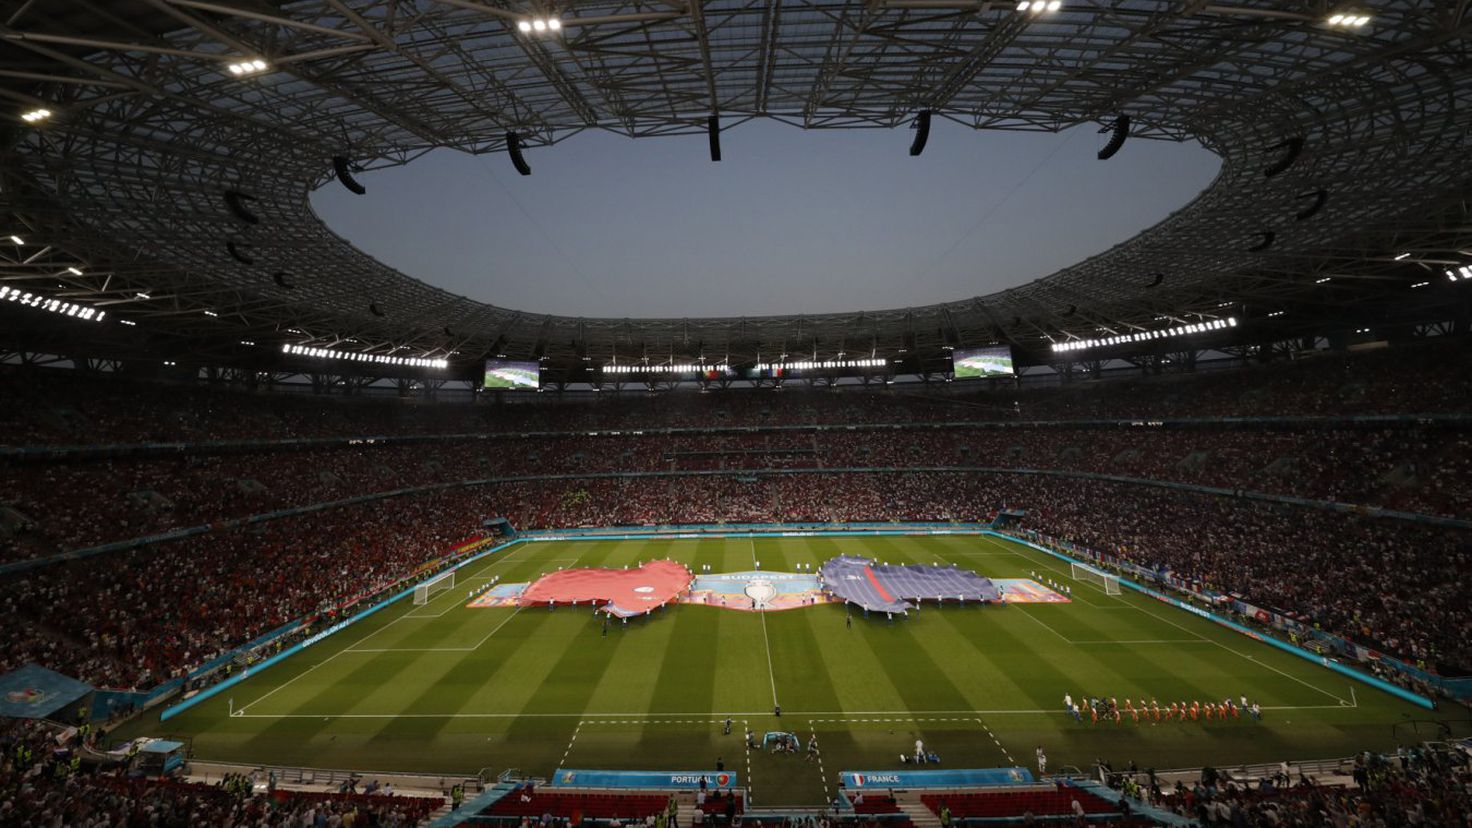 Sevilla sells more than 13,000 tickets for the Budapest final
